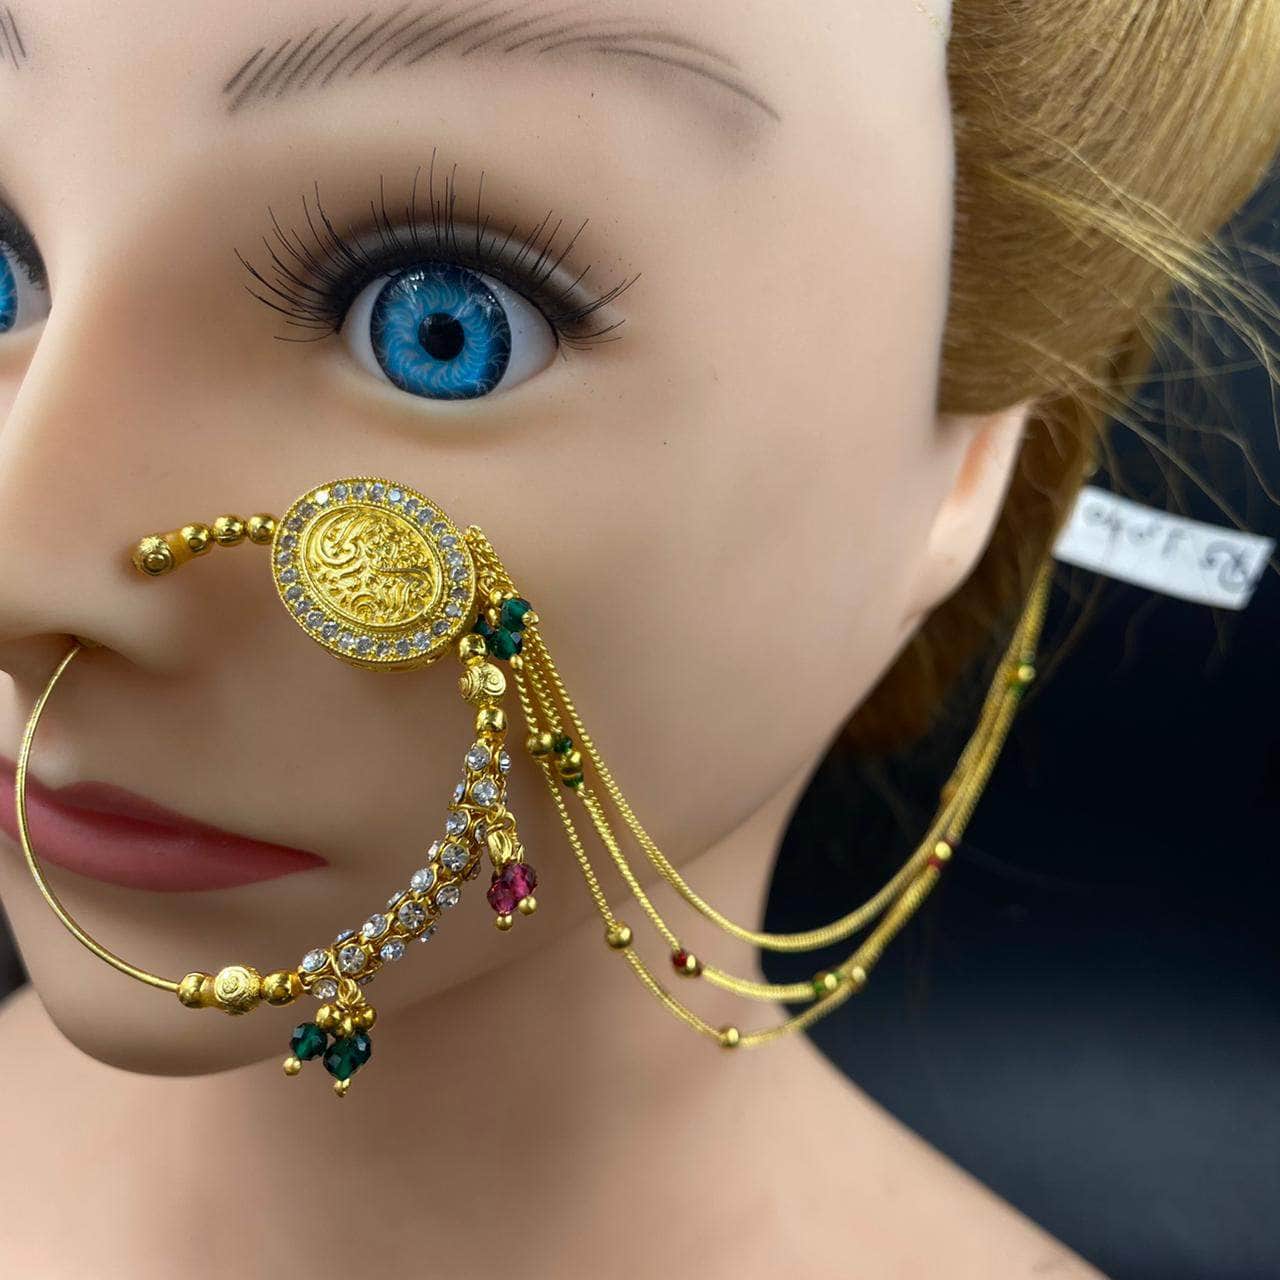 Golden Indian Nathni Ethnic Nose Pierced Small Nose Ring Woman Fashion  Jewelry | eBay